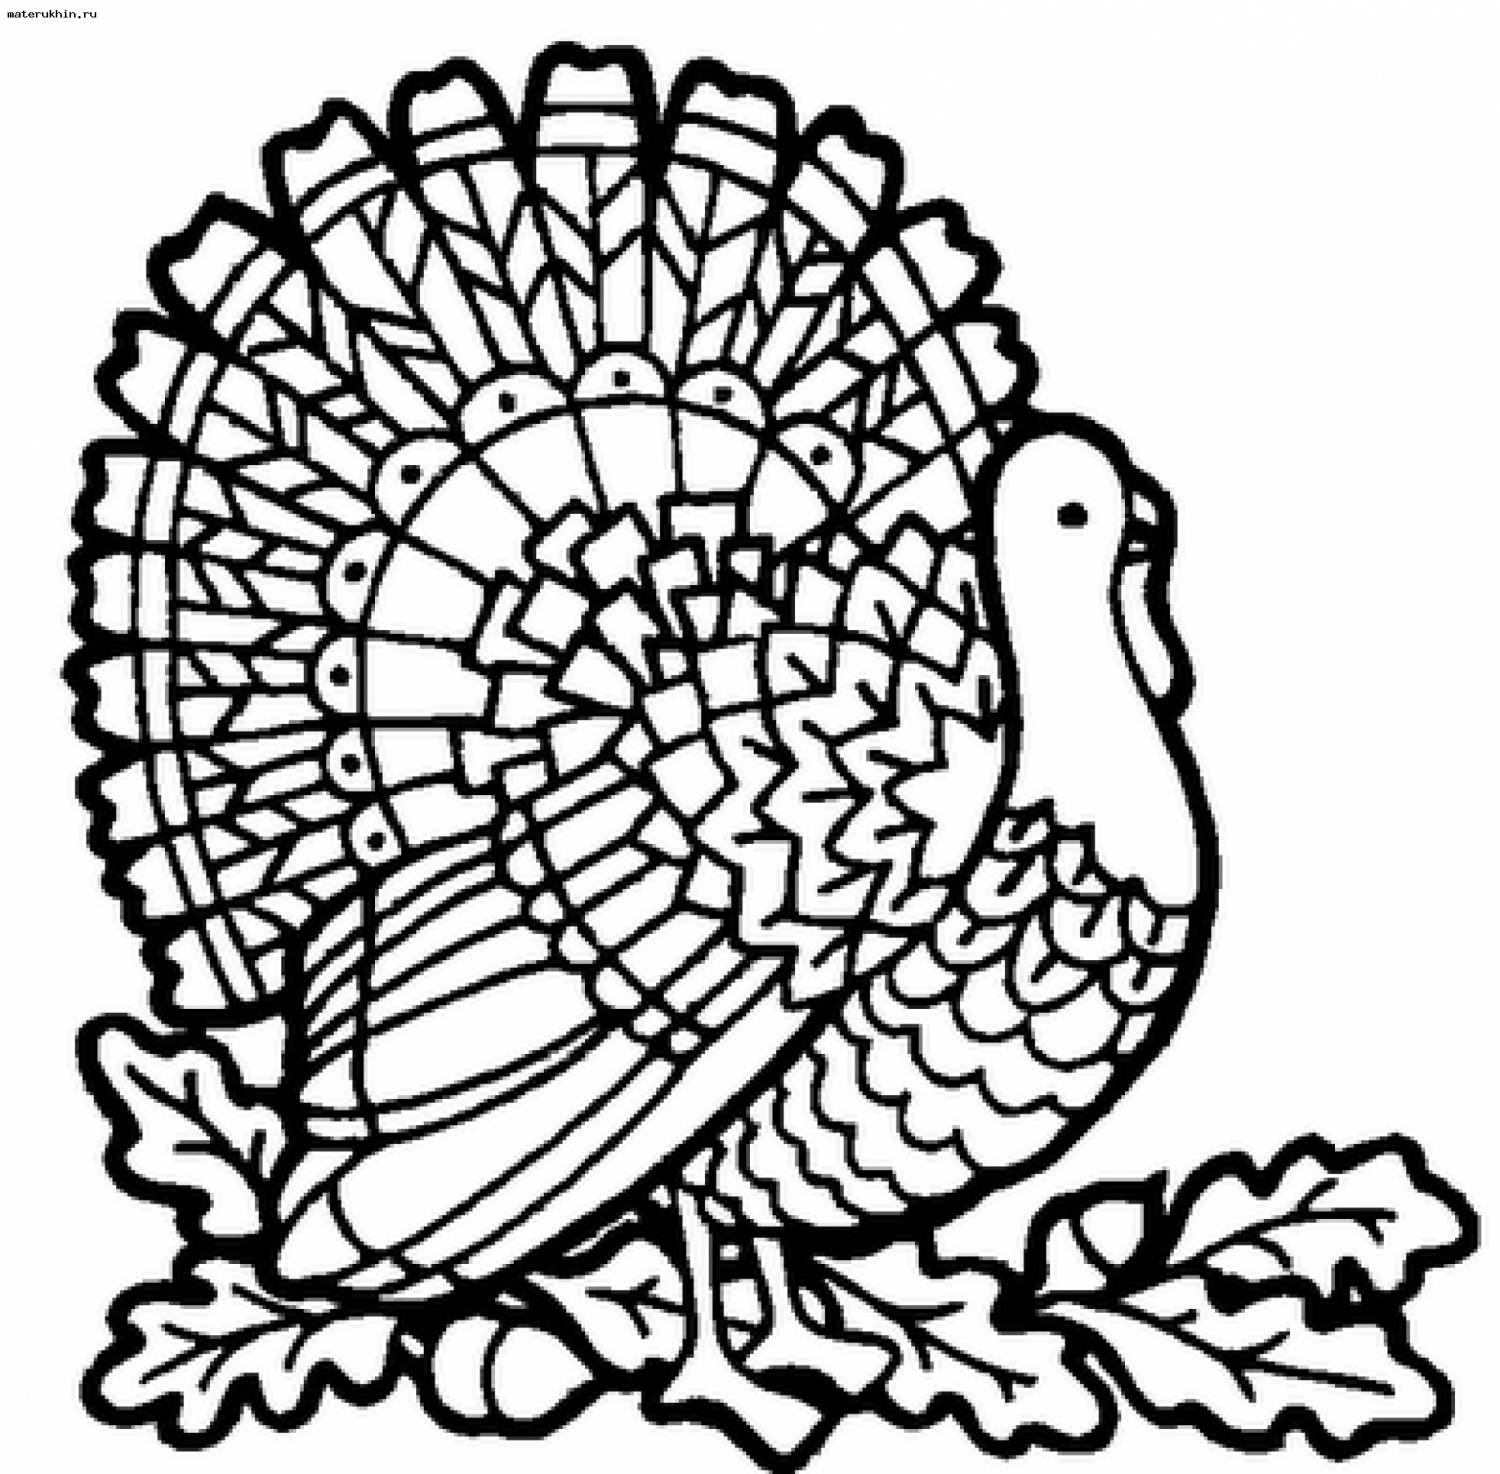 Thanksgiving Day Coloring Pages for childrens printable for free